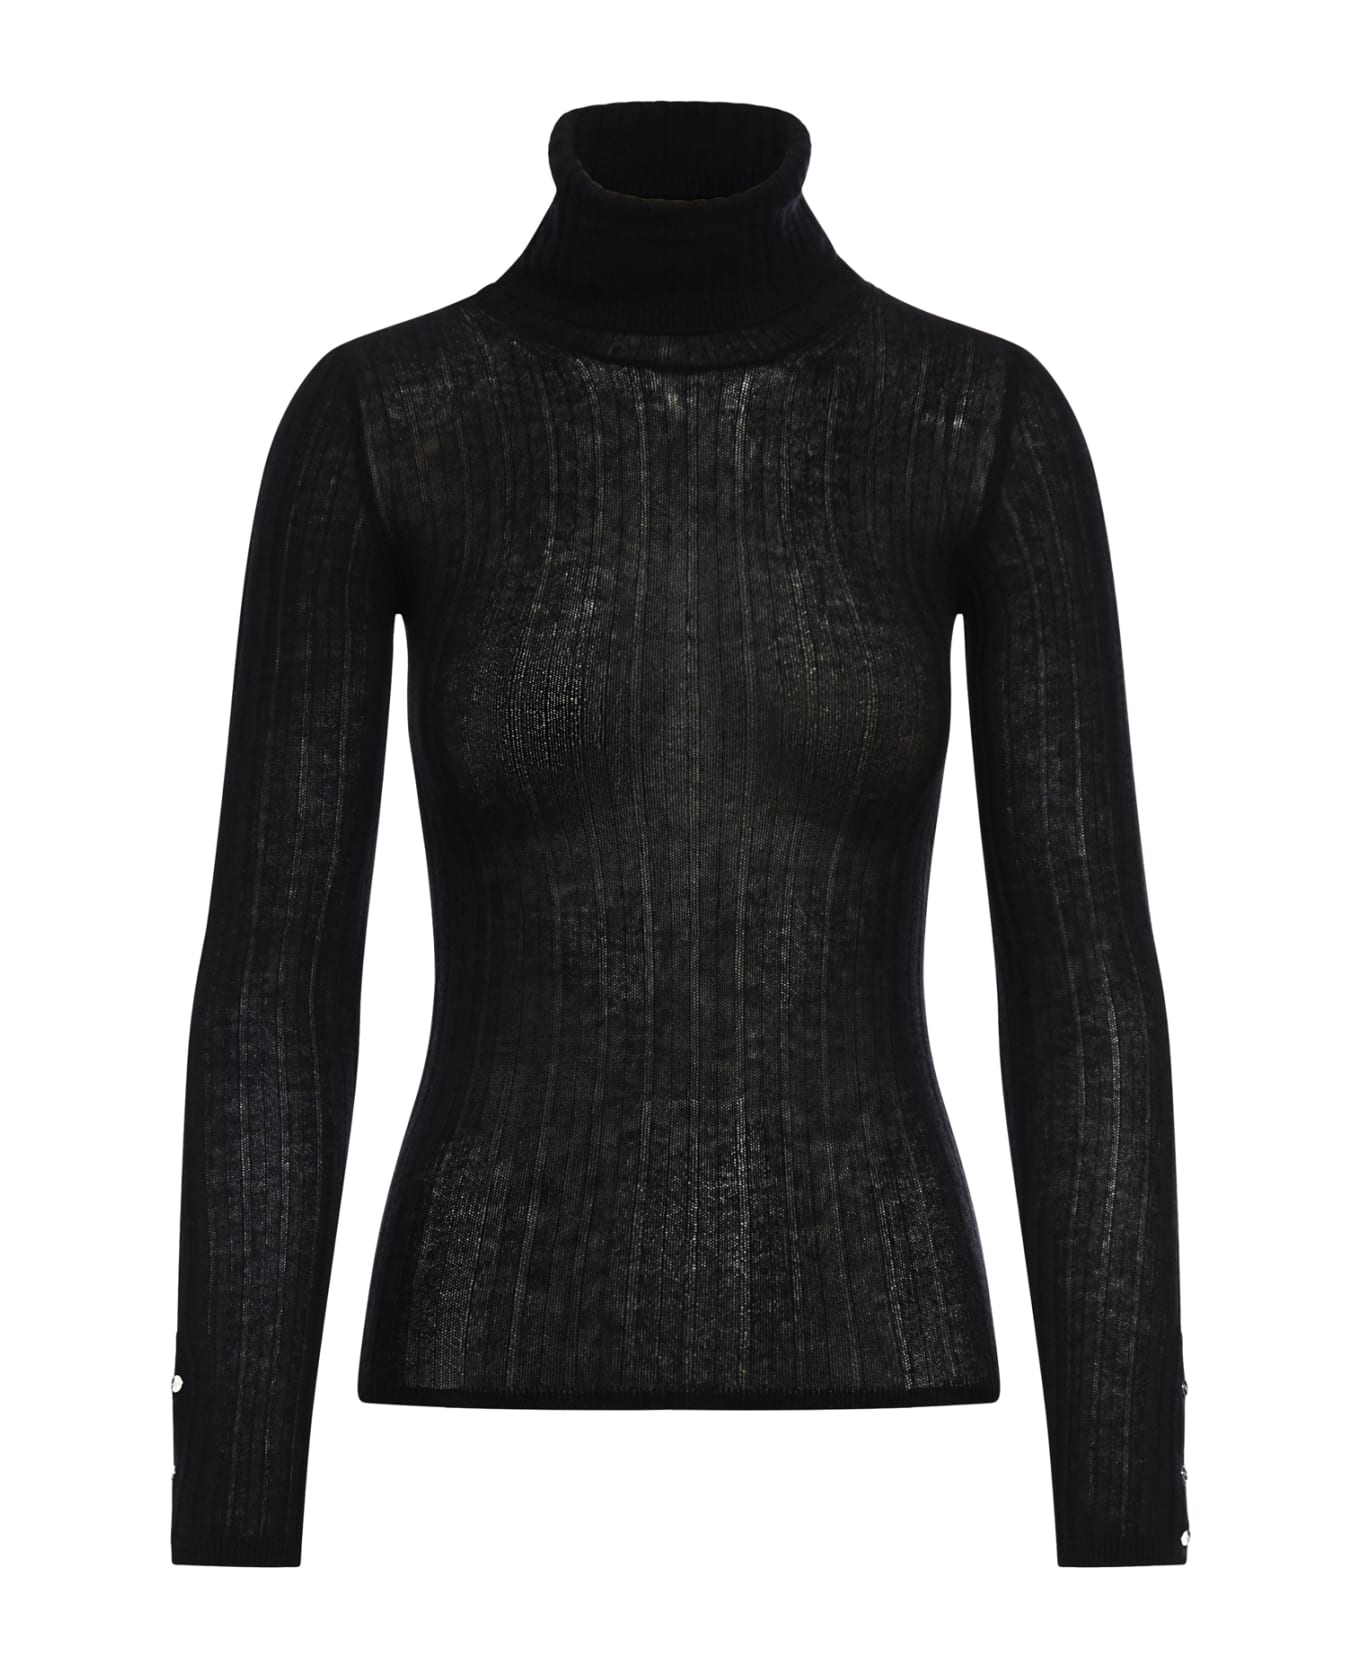 Durazzi Milano "cashmire High Neck Top "ribbed Turtle Neck Knitted Top With Branded Cuff Bottons In Cashmere - Black